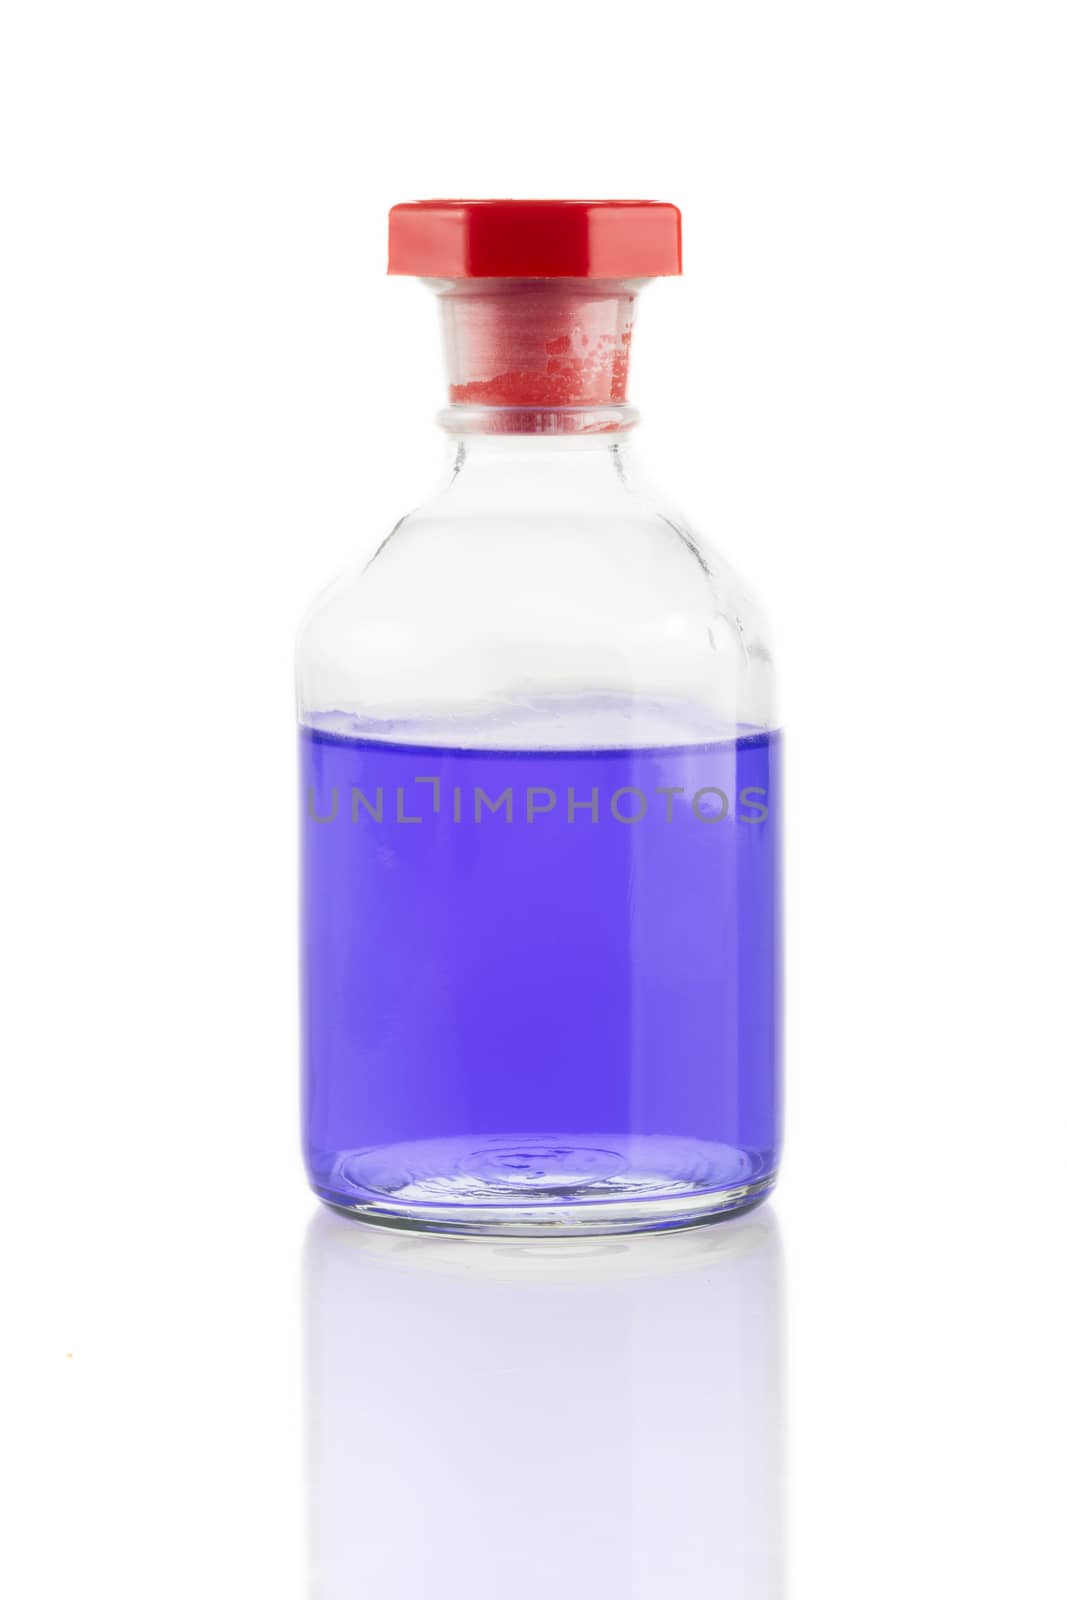 Clear glass bottle with purple liquid and red stopper.